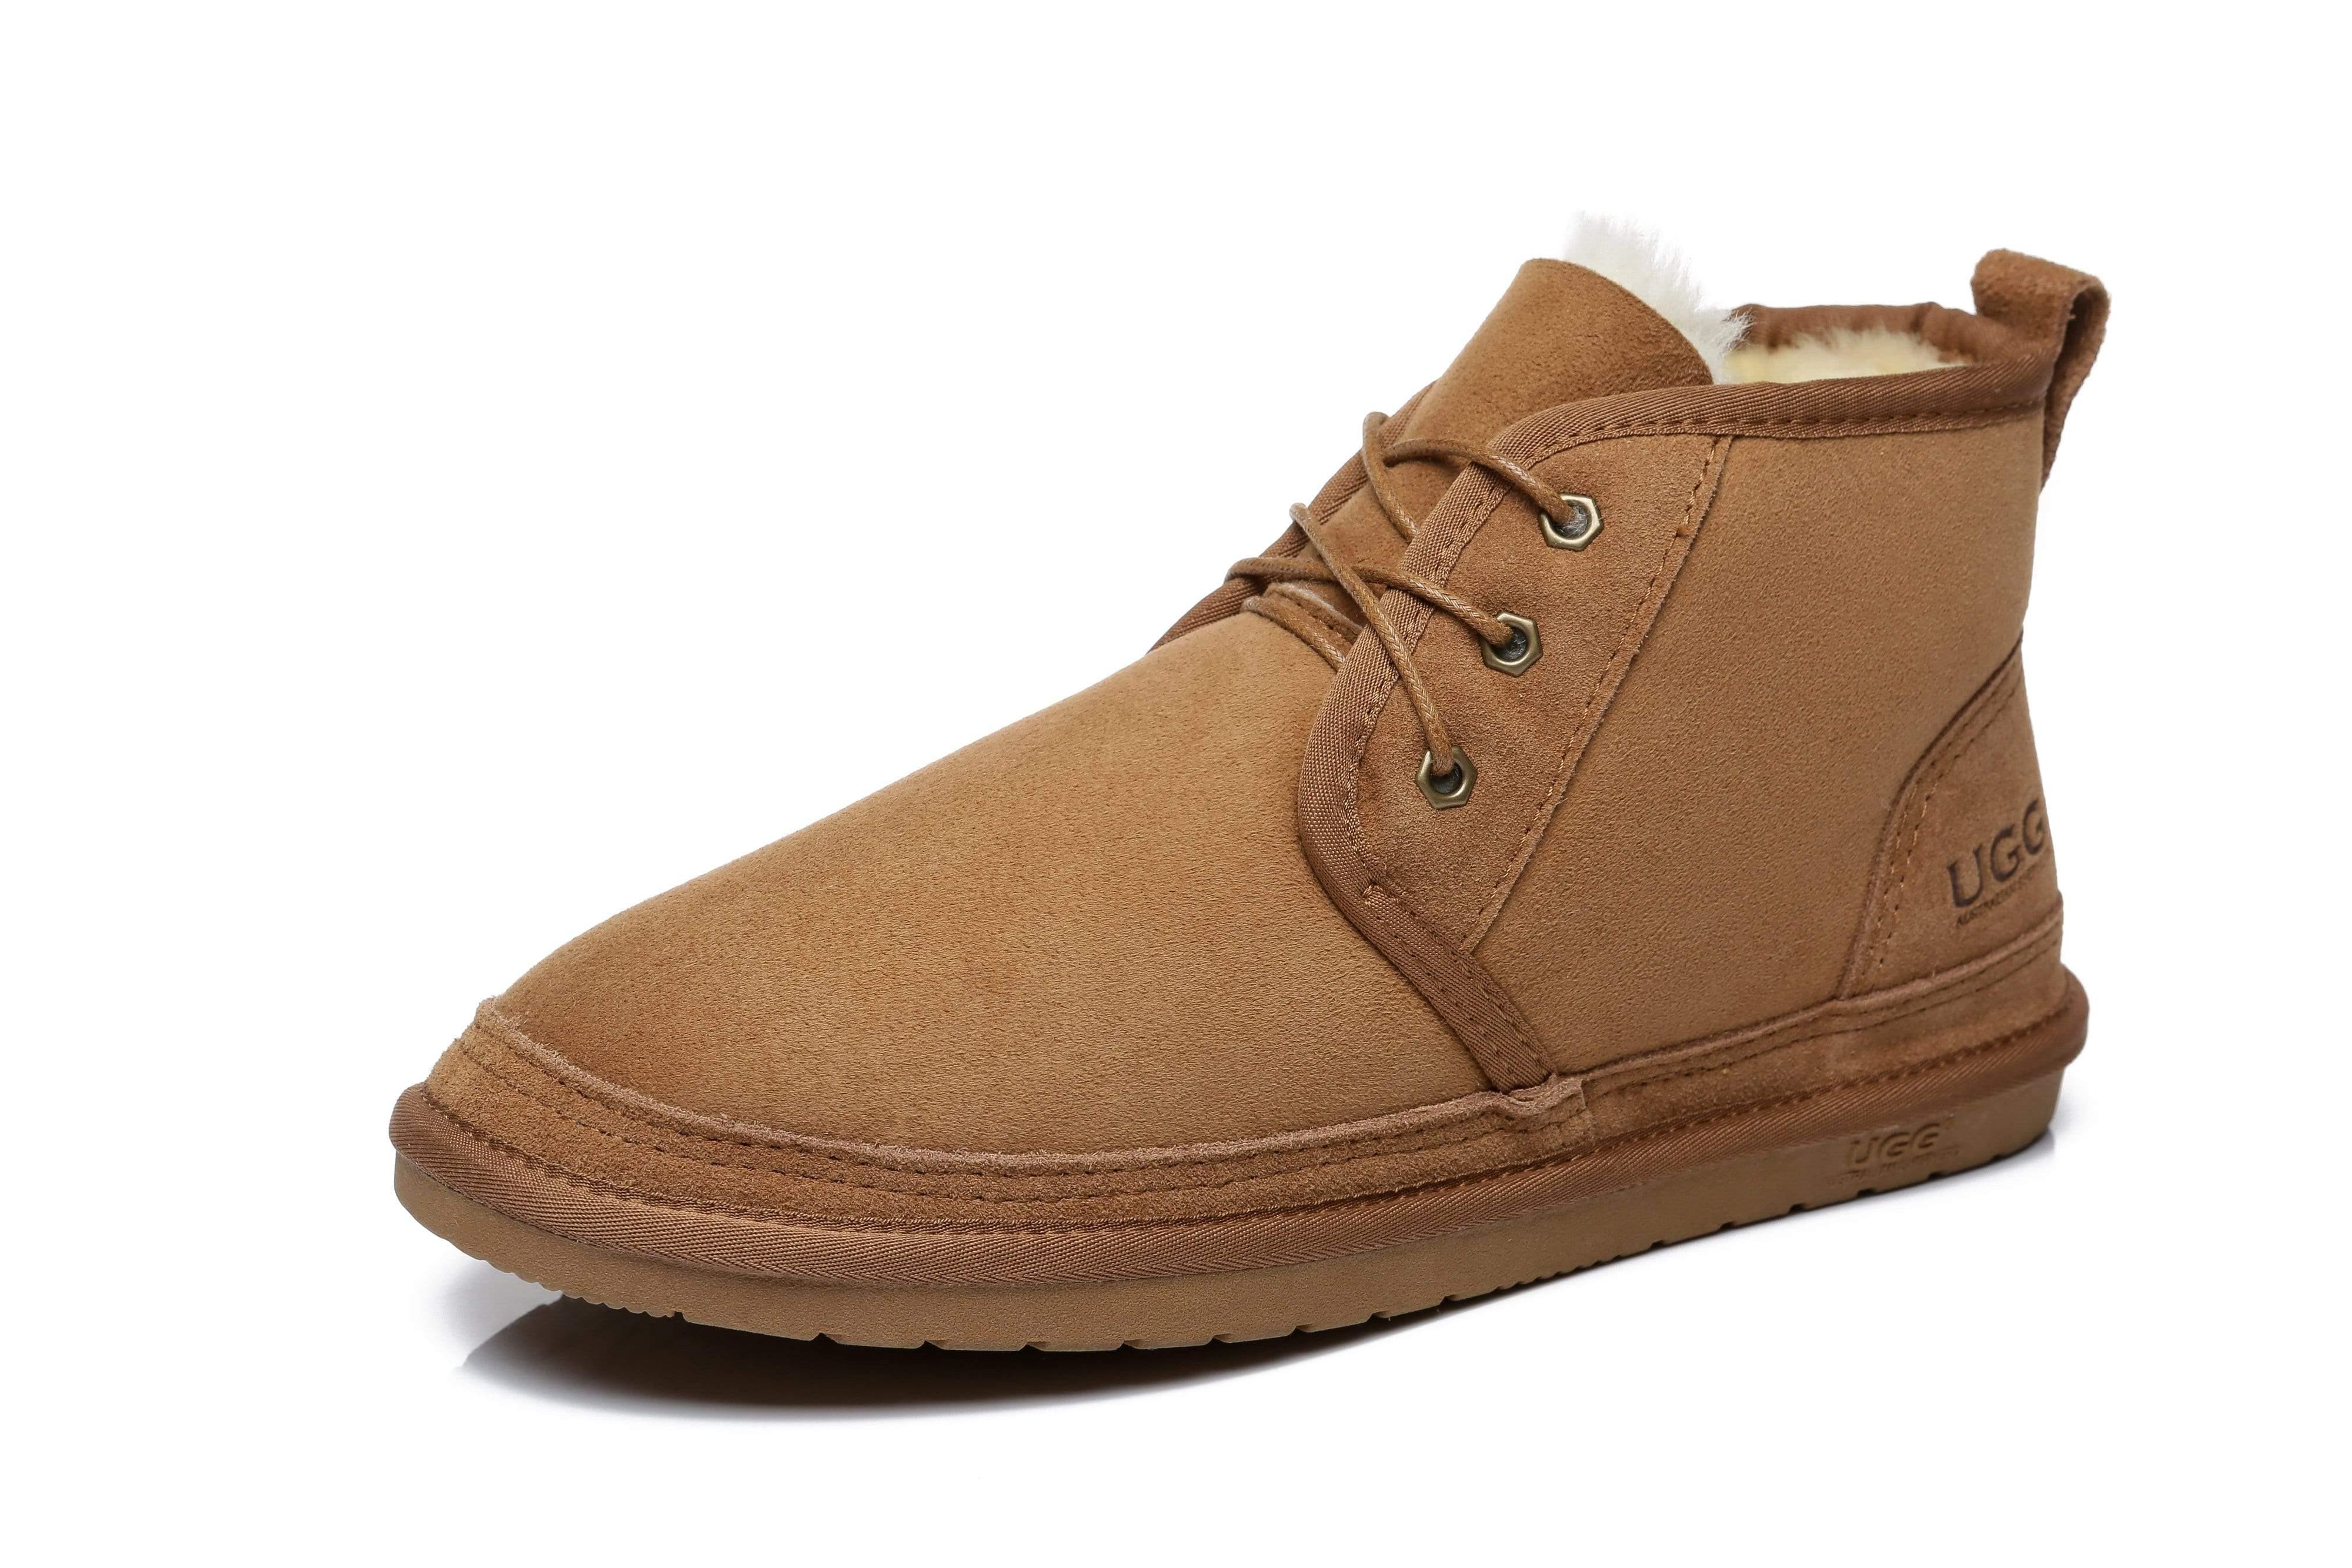 UGG Boots - AS Men Casual Ugg Boots Kelvin